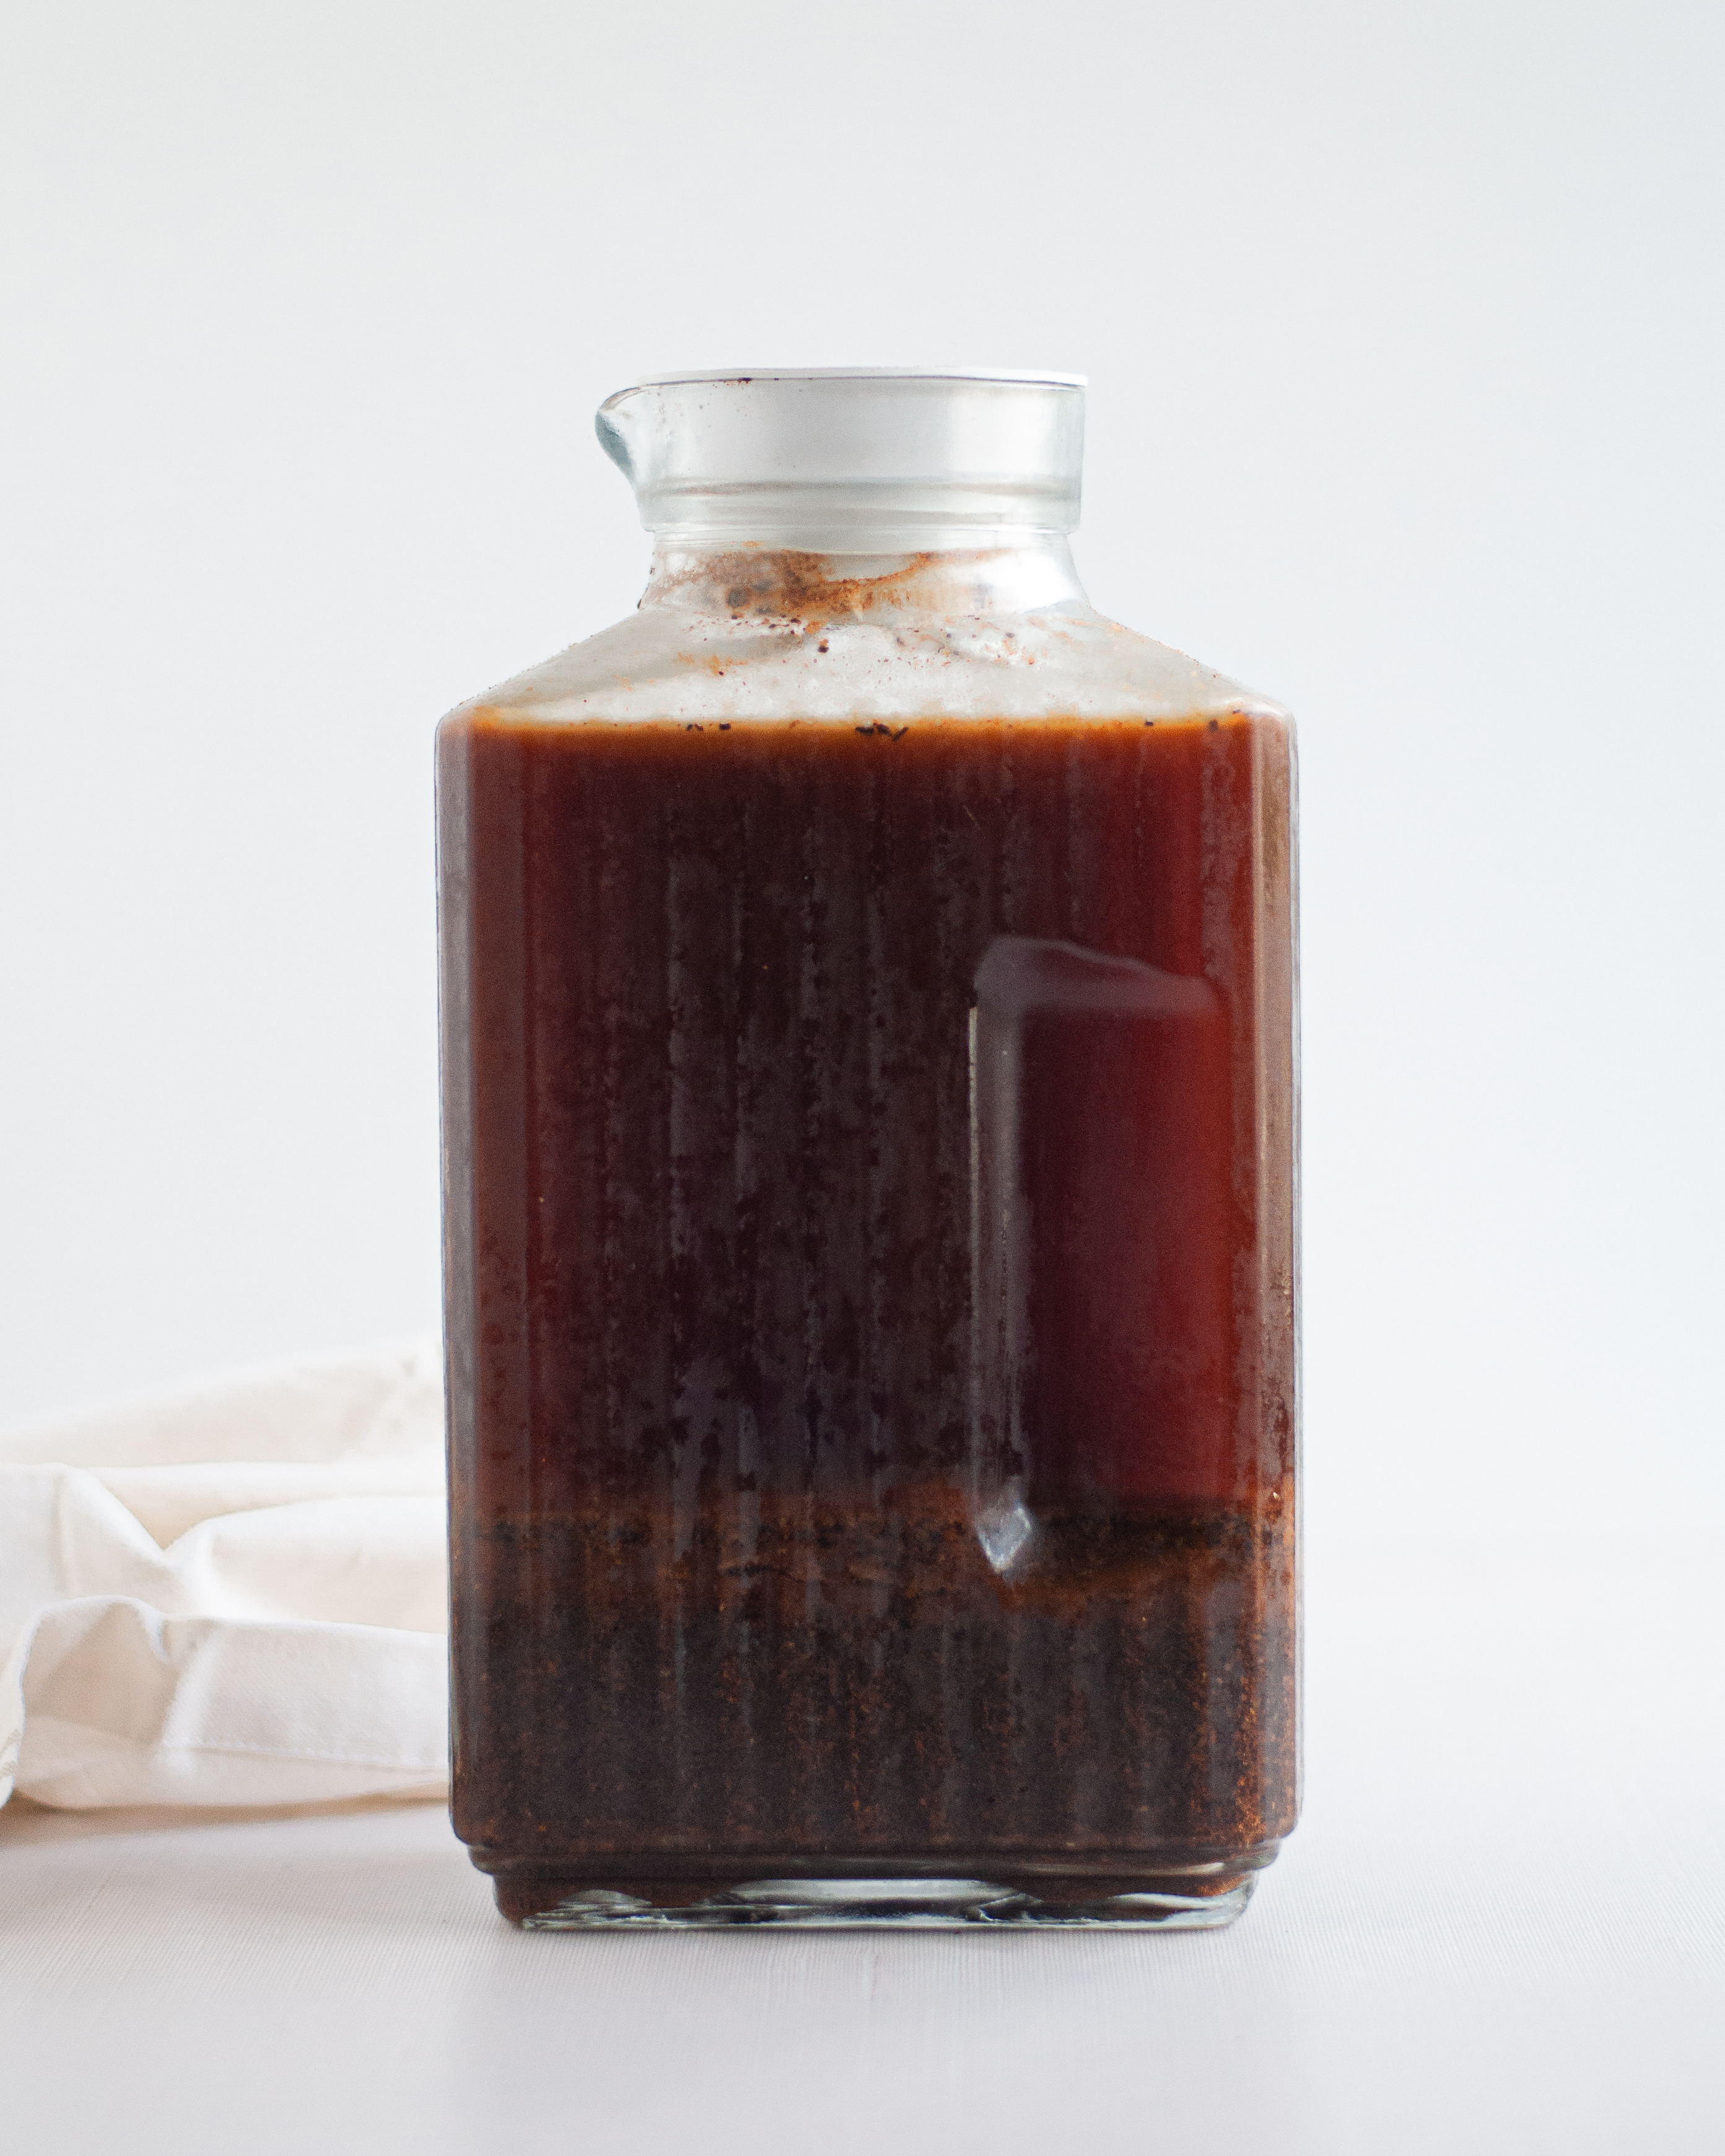 Homemade cold brew concentrate being brewed in a large container with a lid; you can see the course ground coffee and liquid separated and ready to be strained